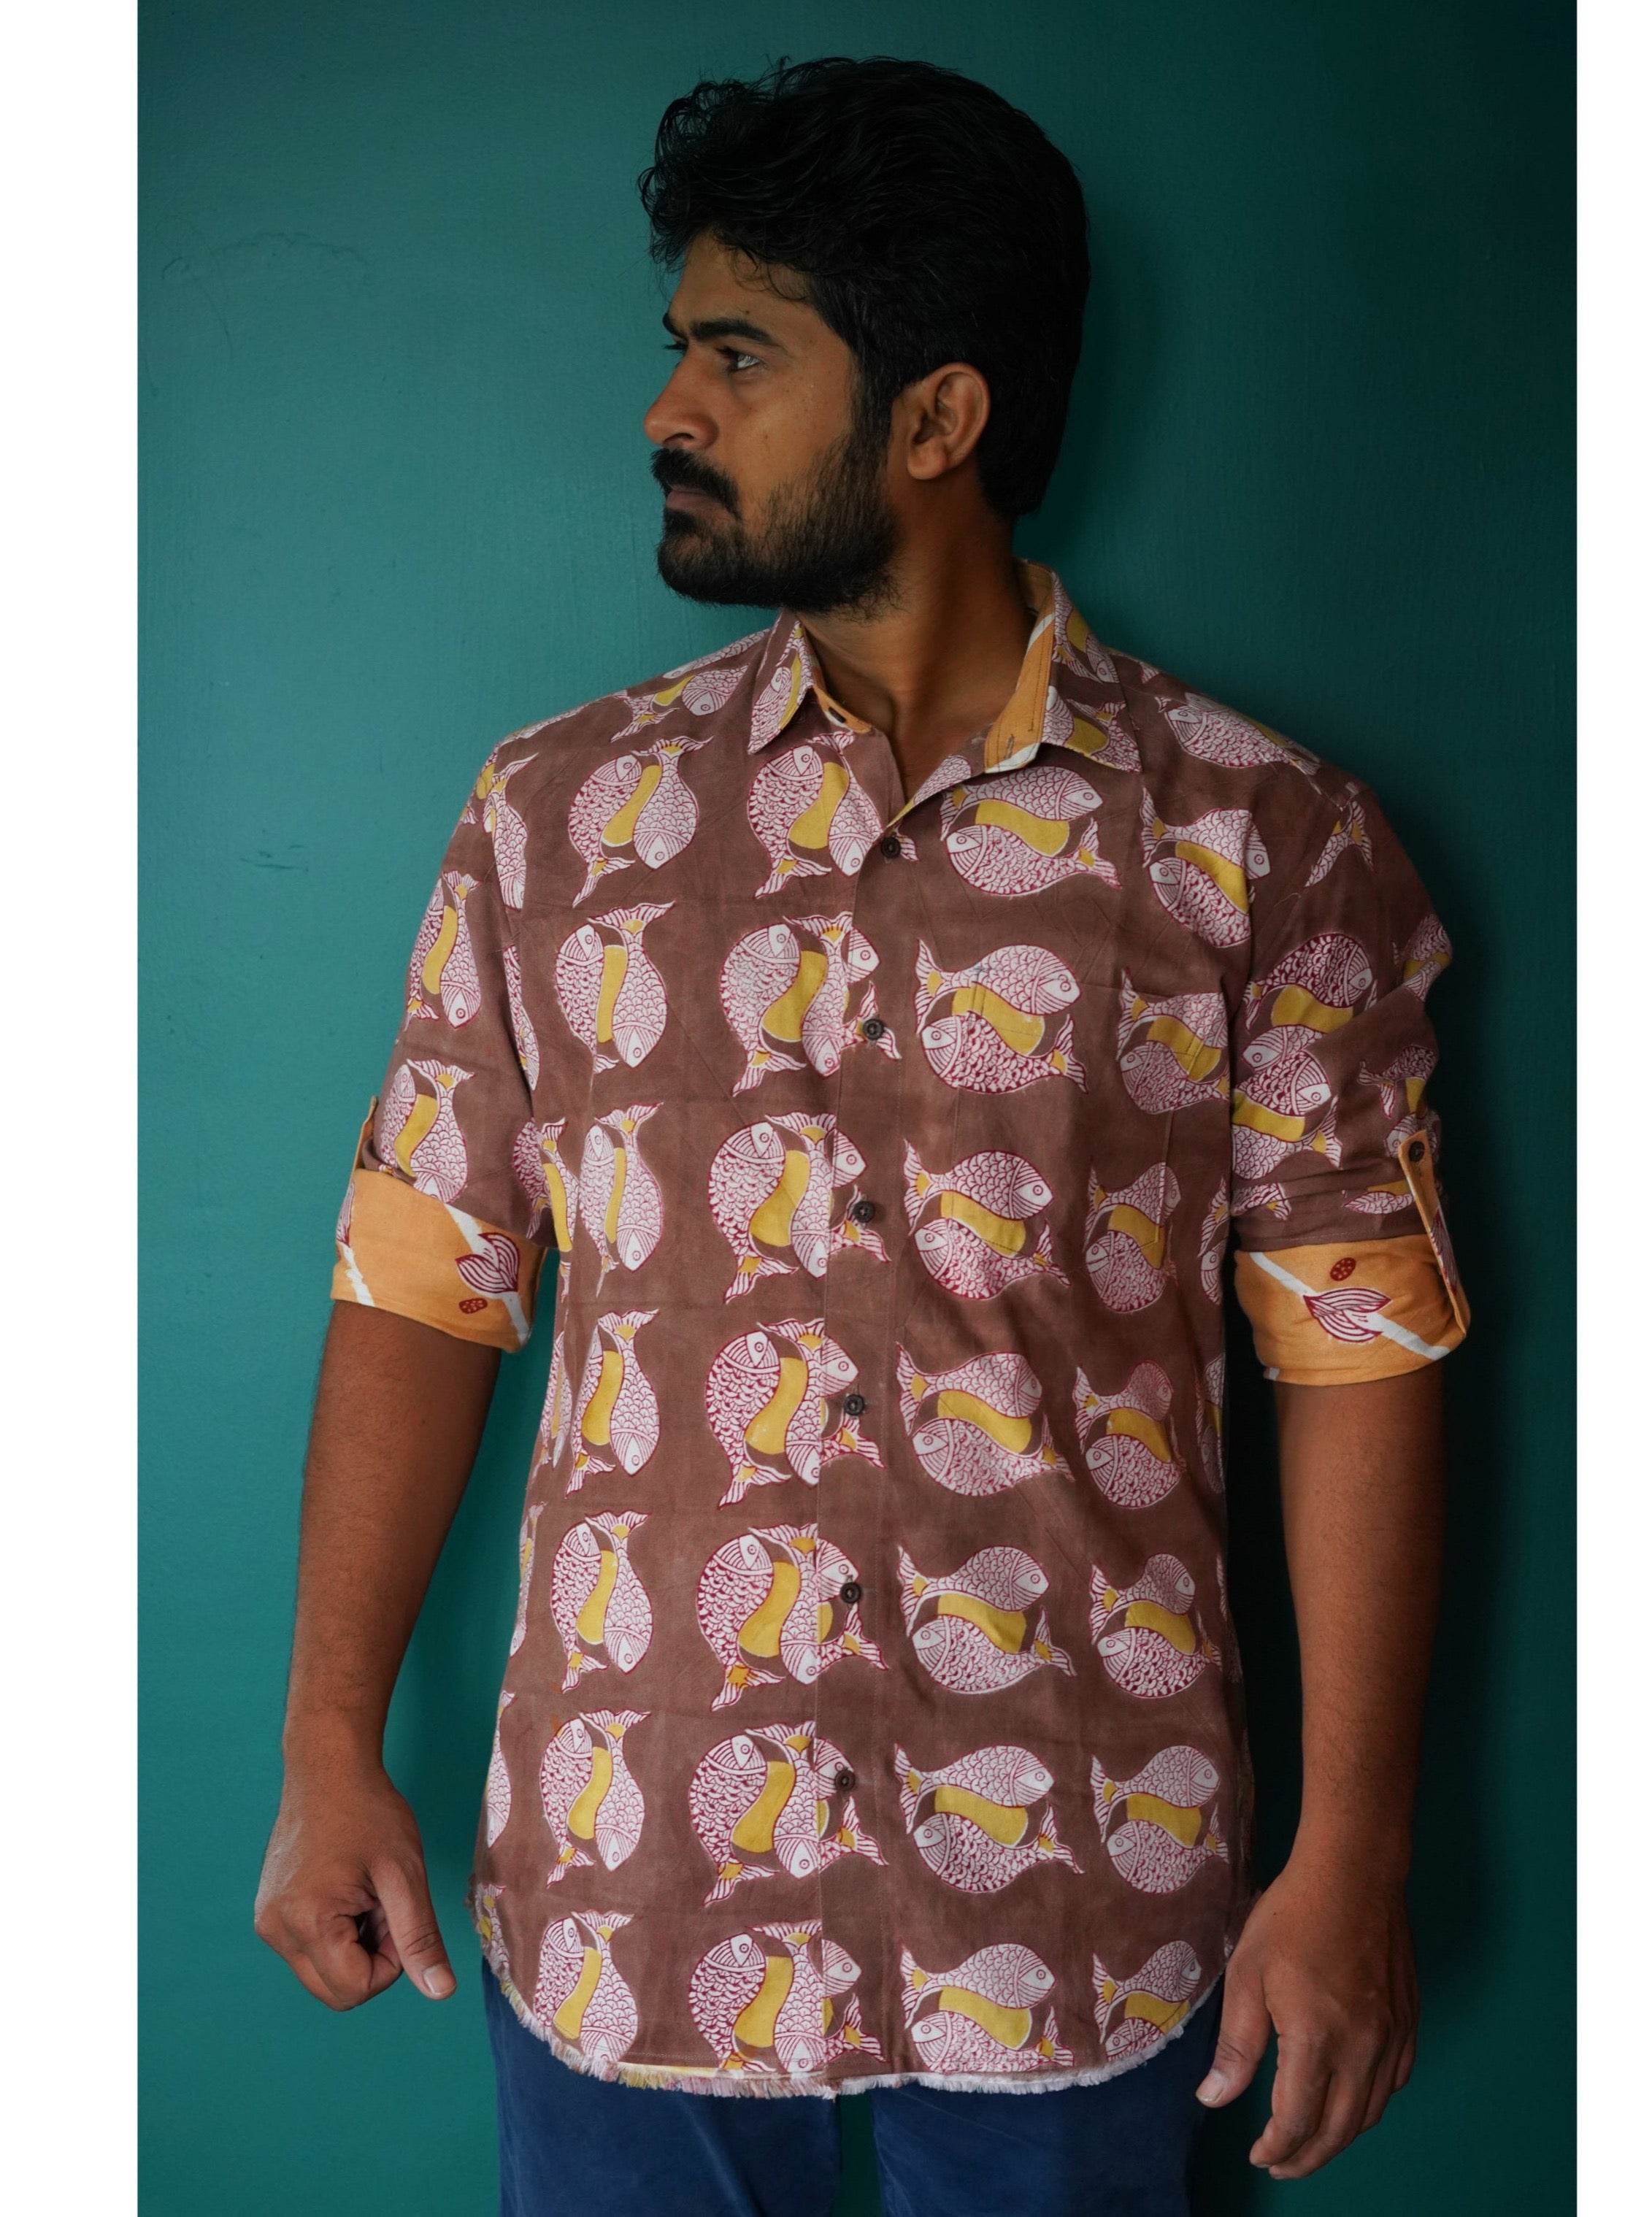 Men's full sleeve cotton shirt featuring fish and sun motif hand block printed using natural dyes in the shades of brown, yellow and red. 